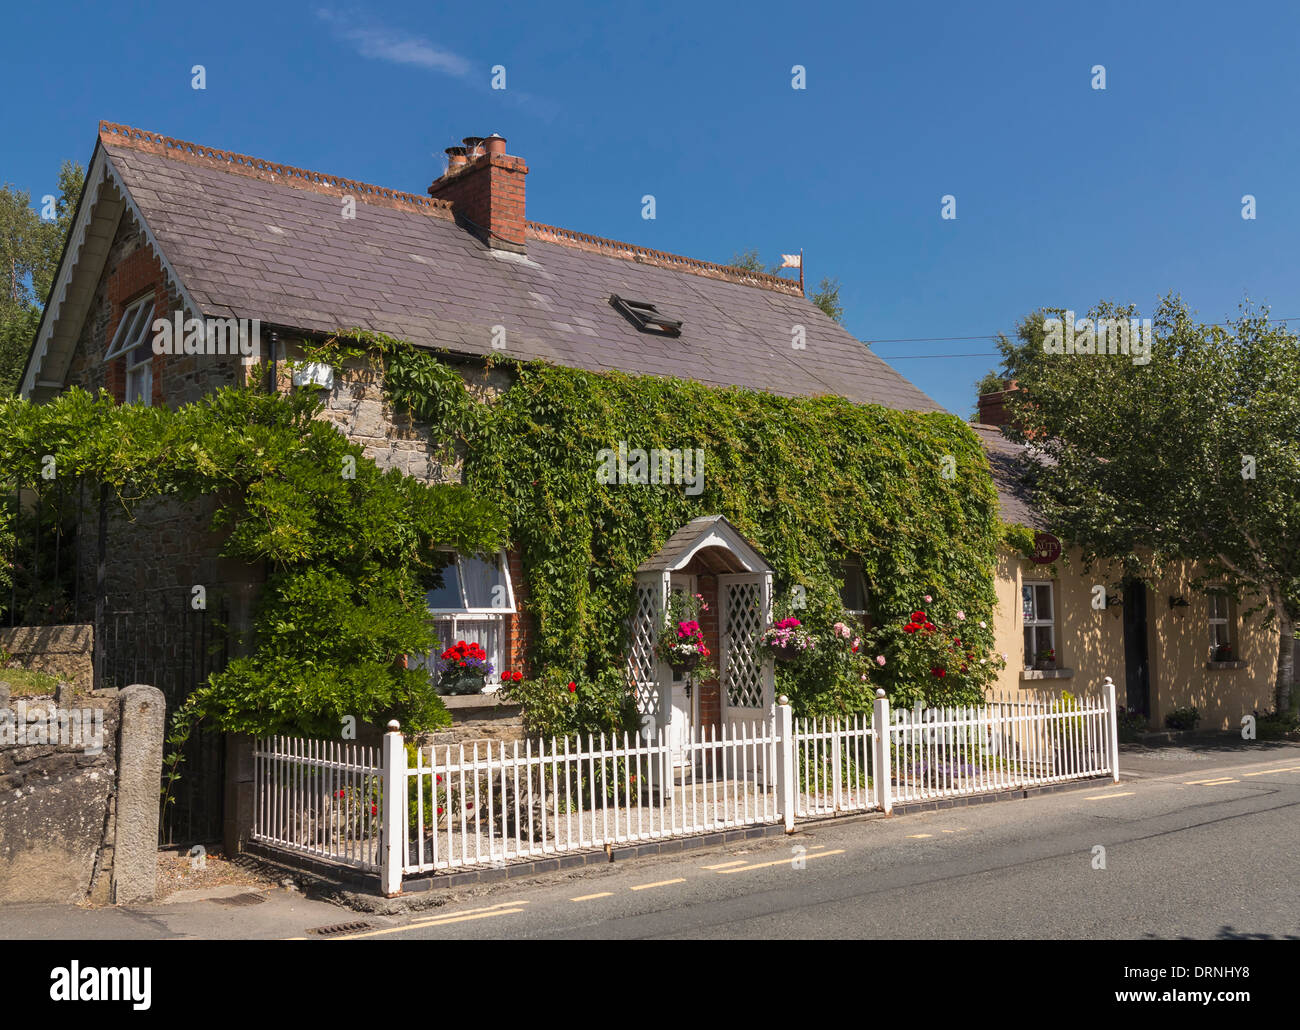 Efeuumranktes Haus in Aughrim, County Wicklow, Irland, Europa Stockfoto